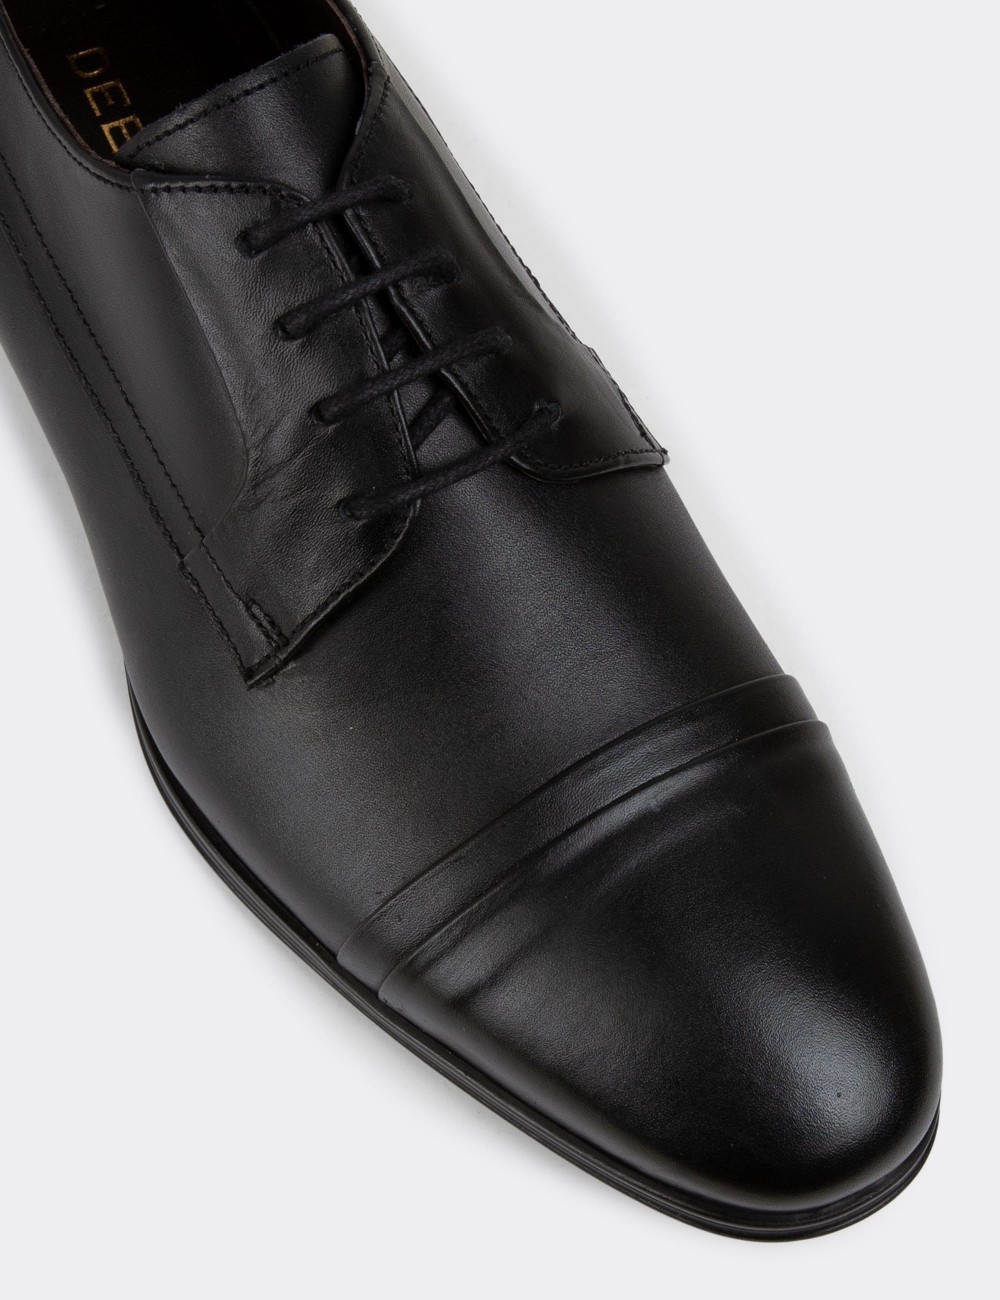 Black Leather Classic Shoes - 01943MSYHC01